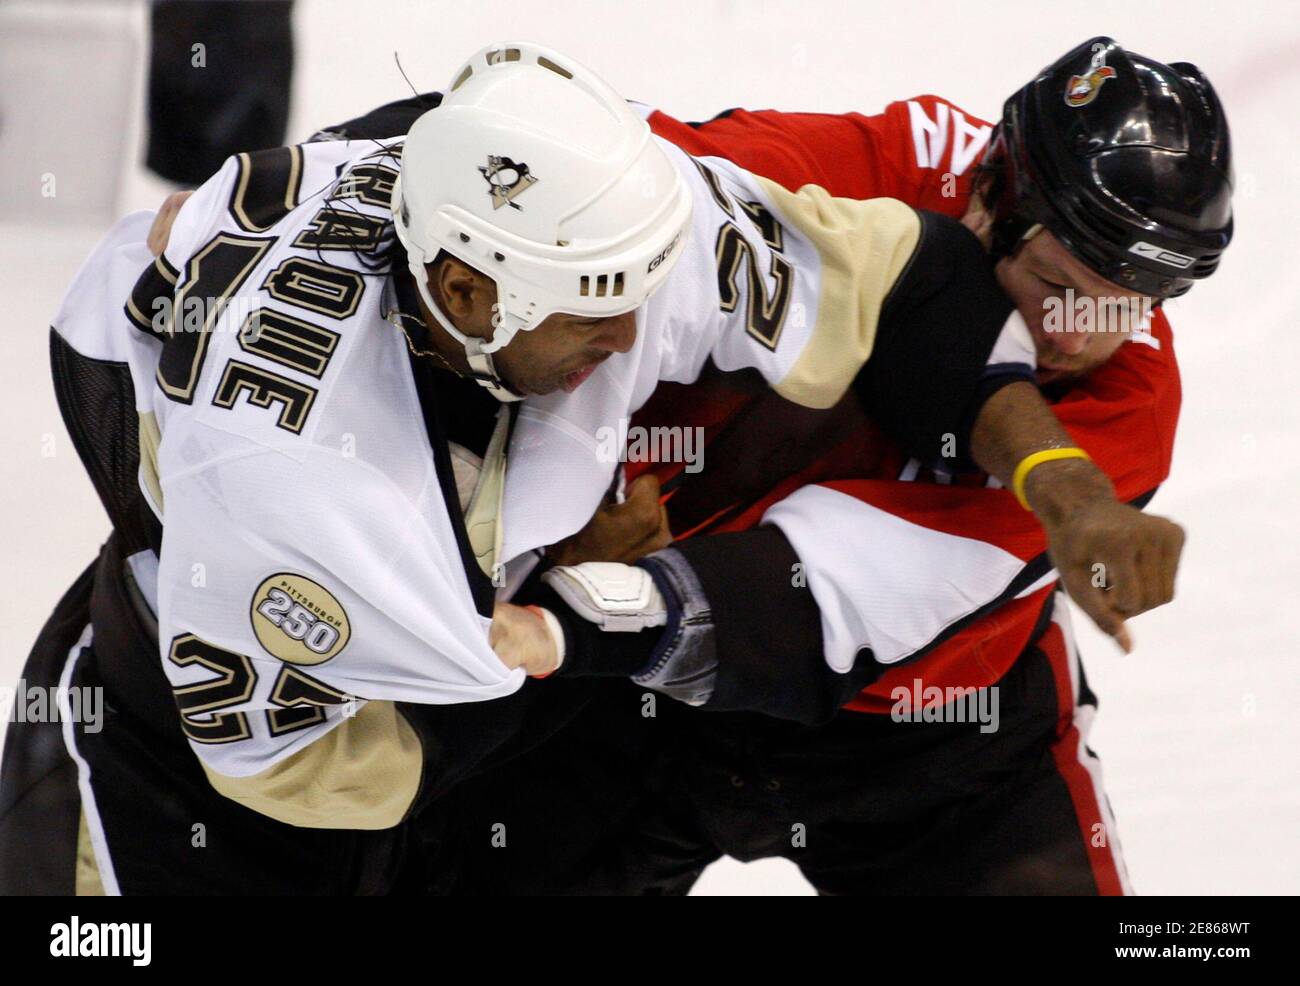 Pittsburgh Penguins' Georges Laraque (L) fights with Ottawa Senators' Brian McGrattan during the first period of their NHL hockey game in Ottawa November 22, 2007.  REUTERS/Chris Wattie   (CANADA) Stock Photo